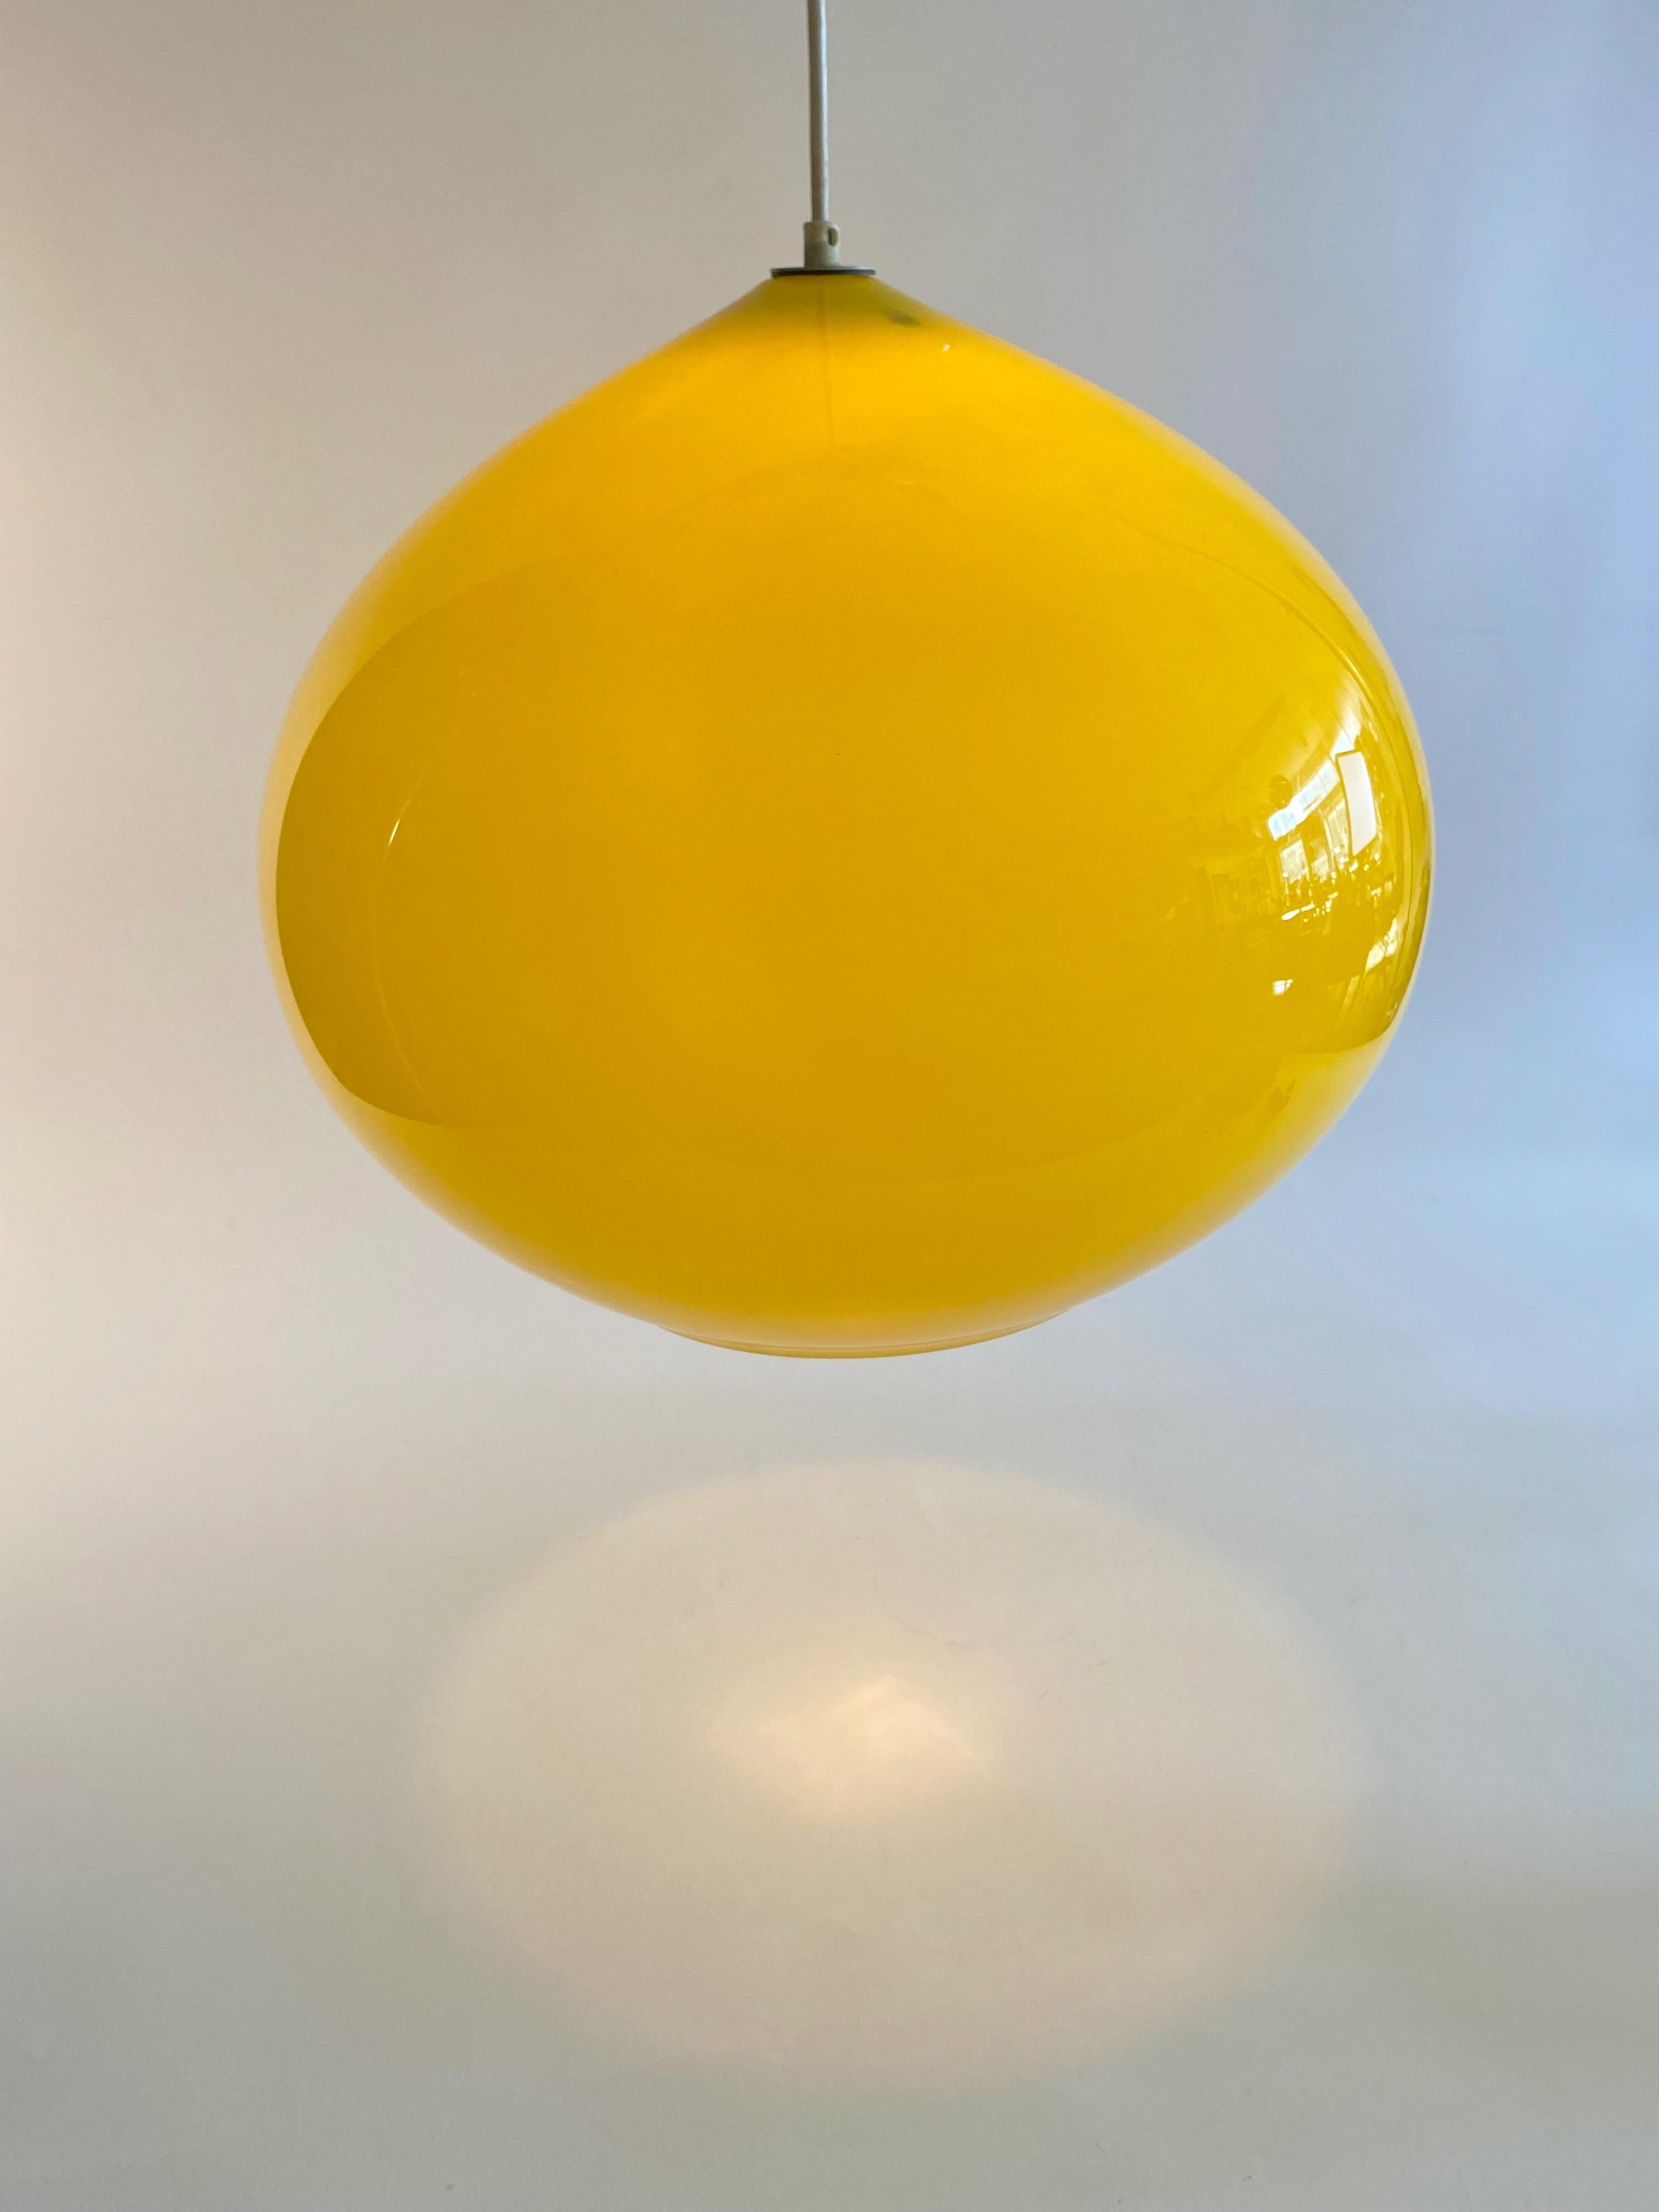 Italian pendant in yellow glass by Gino Vistosi a bulbous tear drop shape with an delicate tapered top with a lipped edge on the bottom. The company started in 1585 at the Murano Glass Works and in 1945 after the war Gino and Luciano Vistosi started